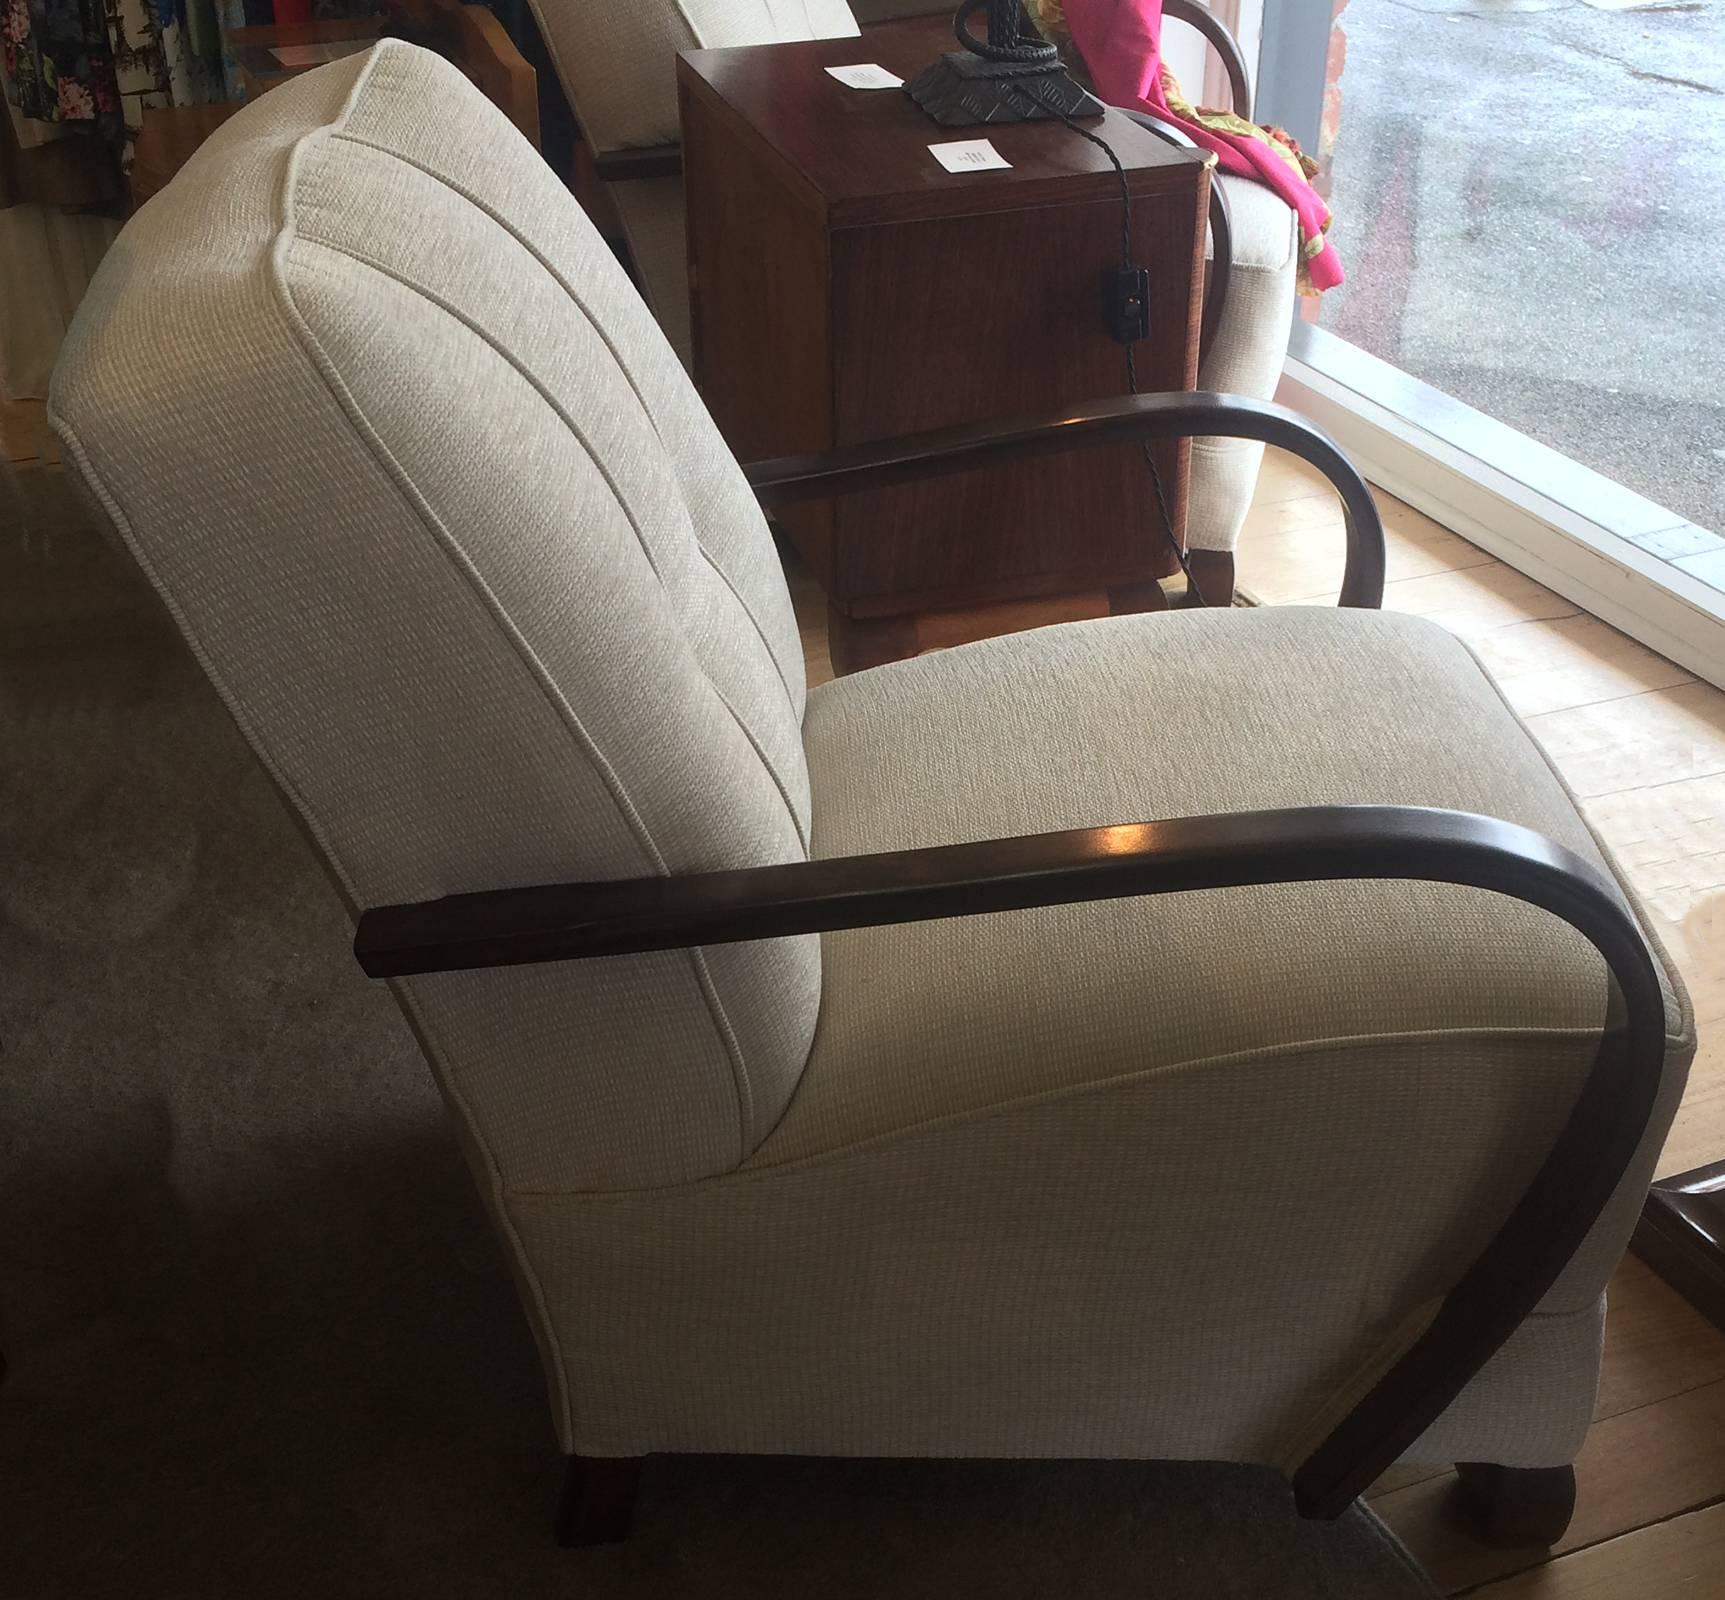 Art Deco pair of outstanding German Armchairs, with “see-through” bentwood arms and heavy vertical, Cubist front legs, square but outward curved rear legs. Amazingly comfortable deep cushioning, with excellent lower back support. The chairs are “as